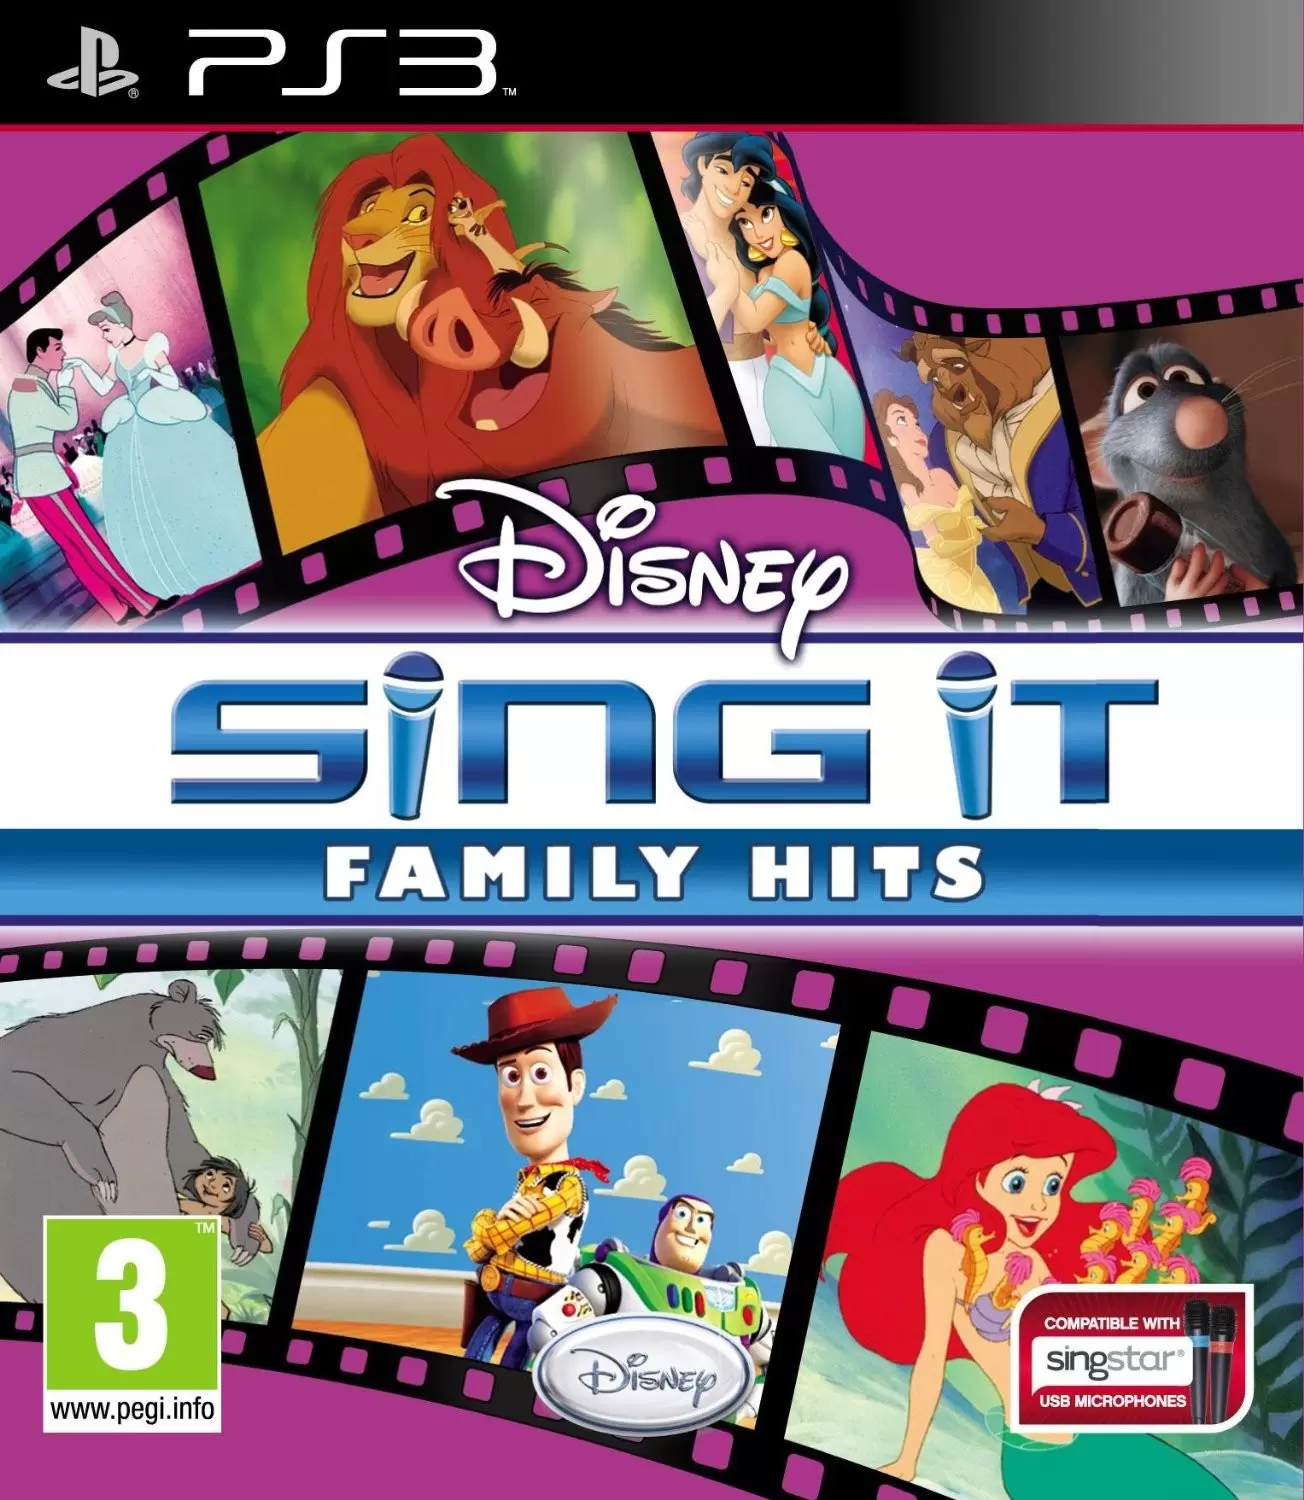 PS3 Games - Disney Sing It: Family Hits